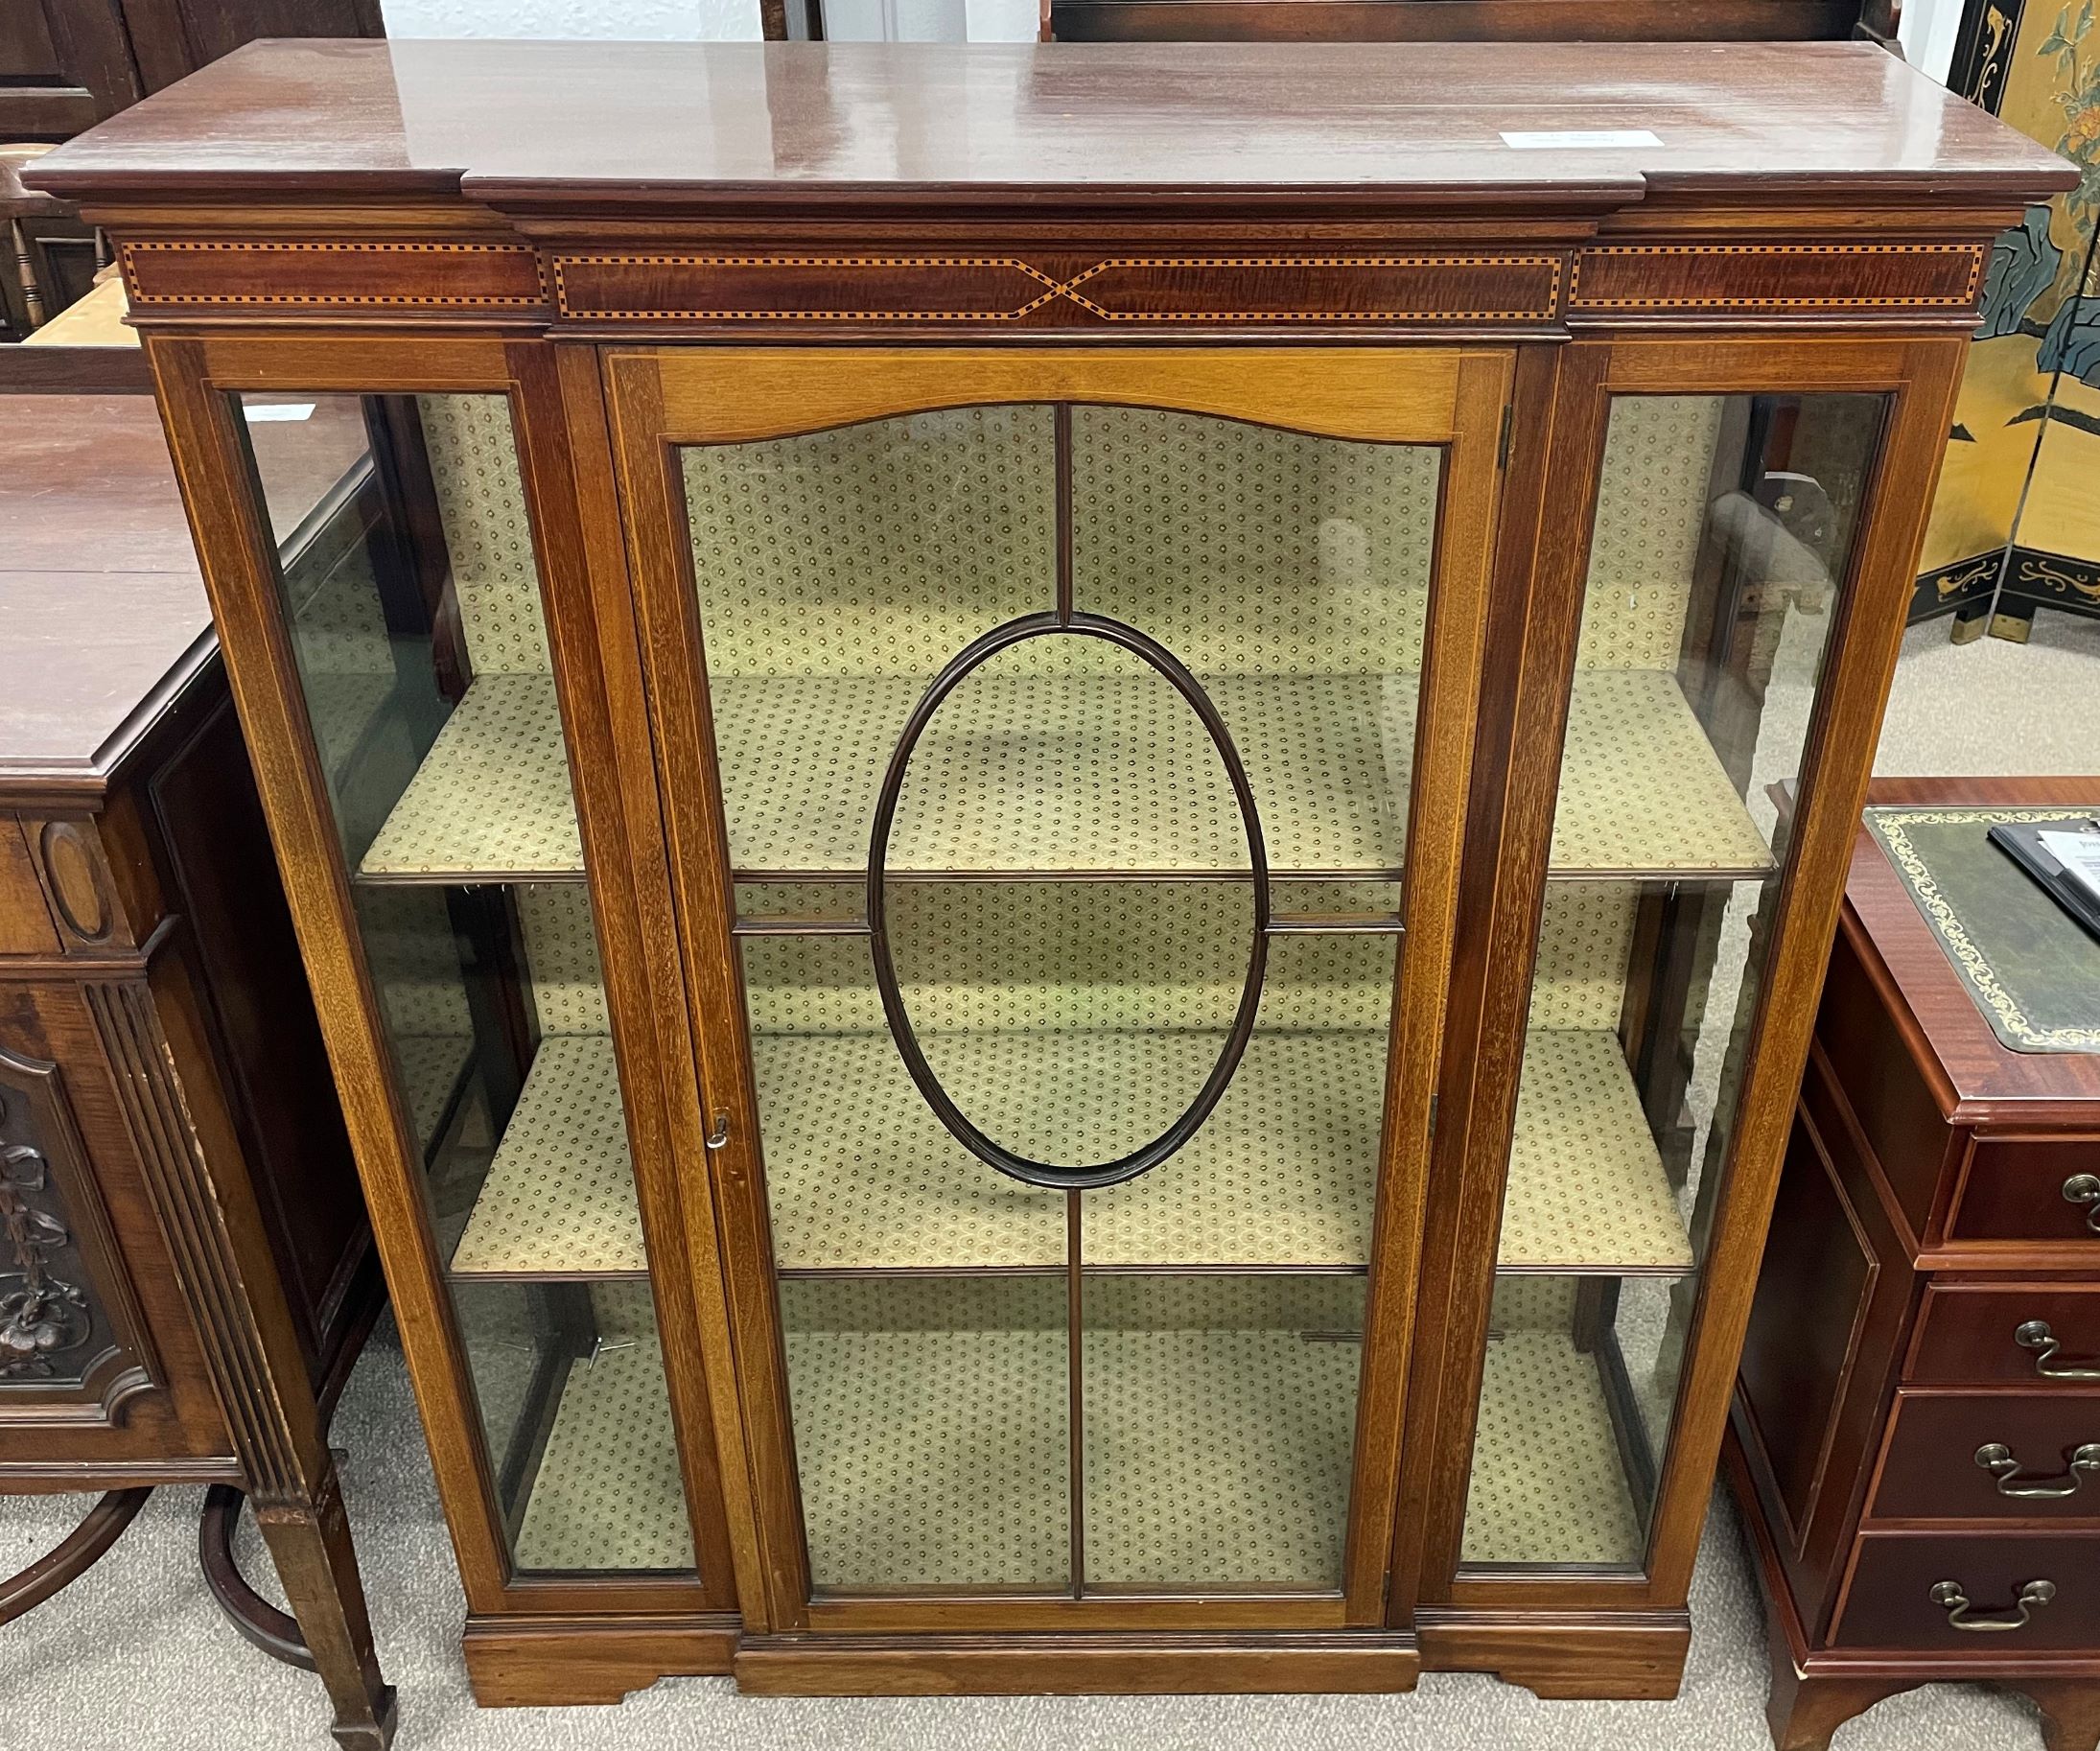 Edwardian breakfront display cabinet with inlay Ht 138cm L 112cm D 38cm